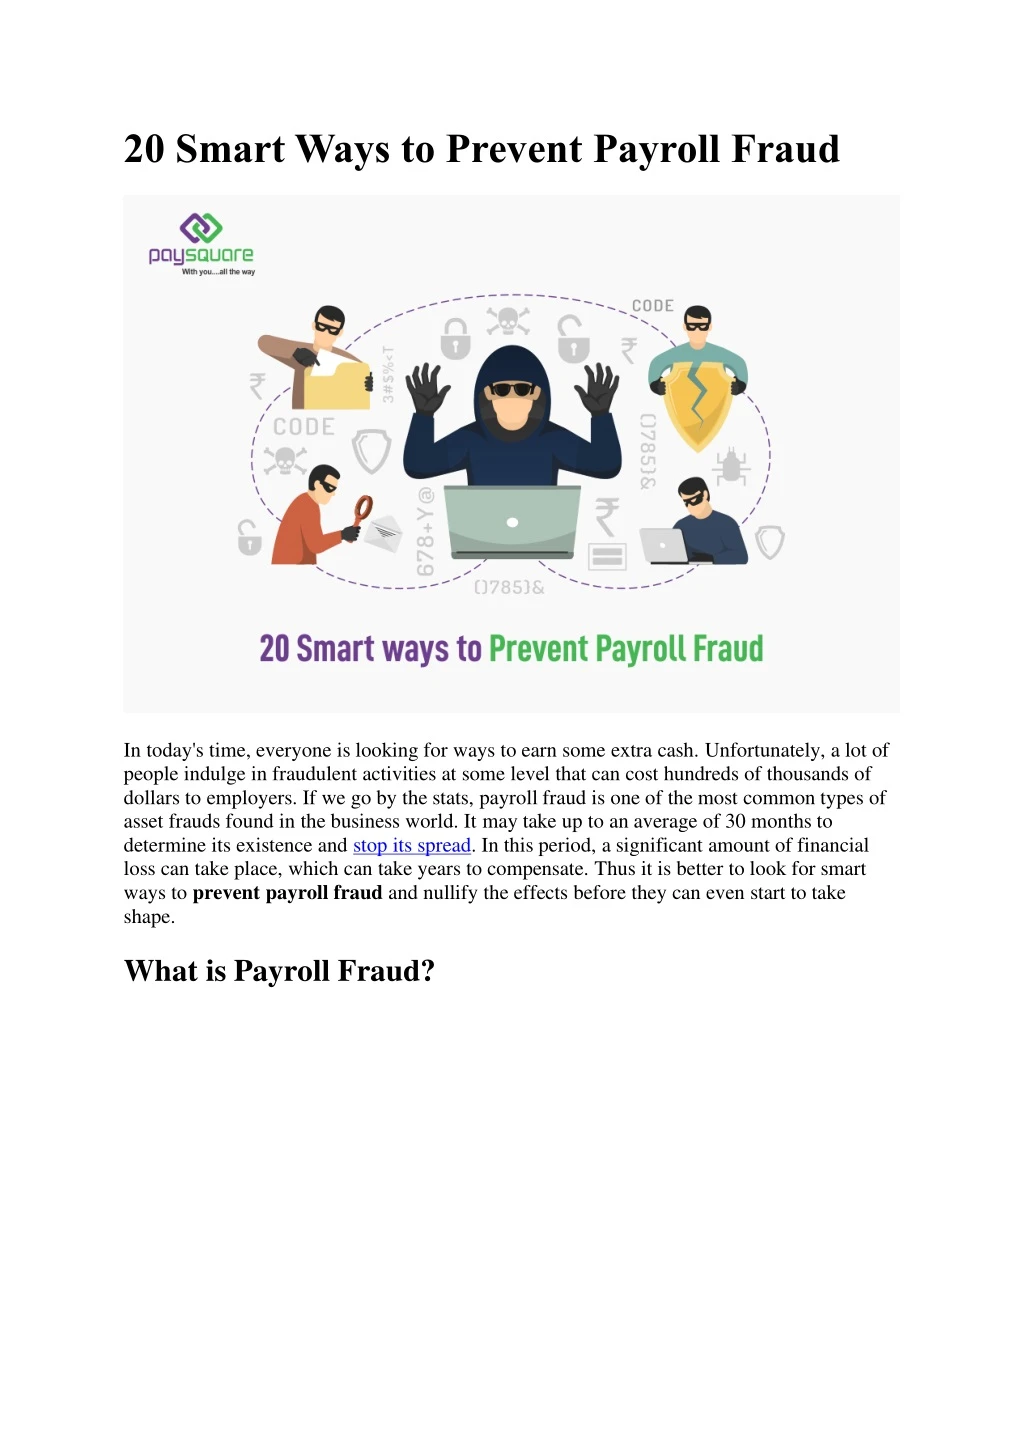 20 smart ways to prevent payroll fraud